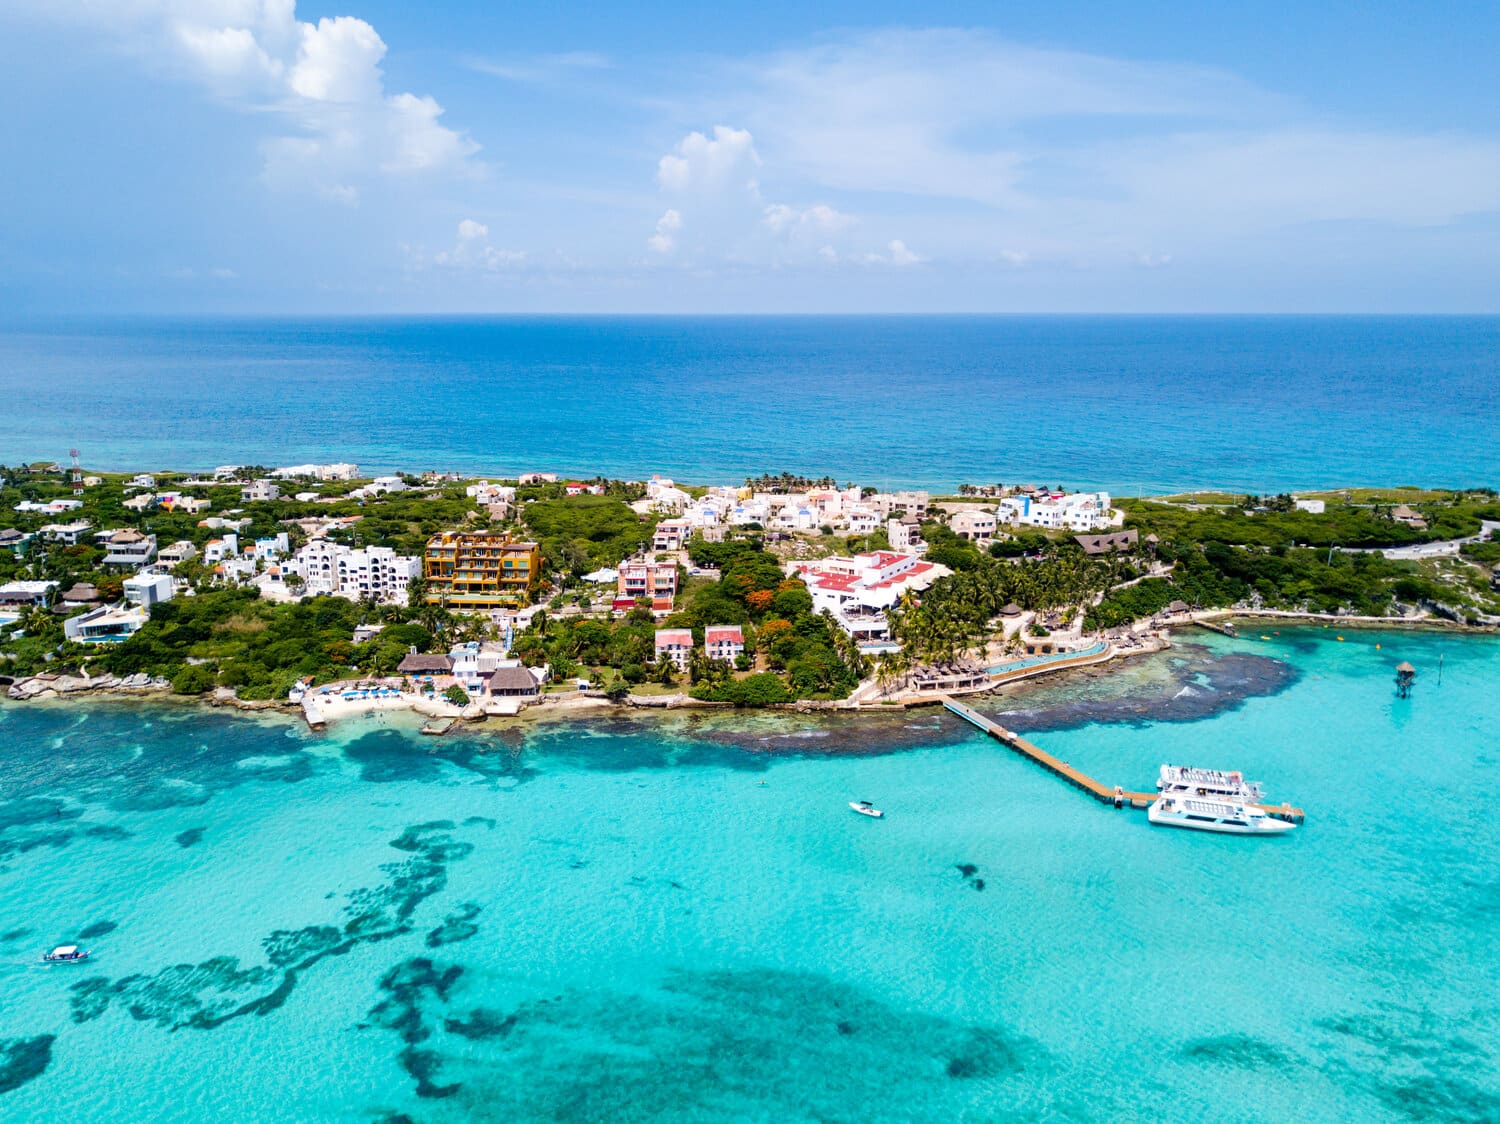 Guide] Things to do in Isla Mujeres